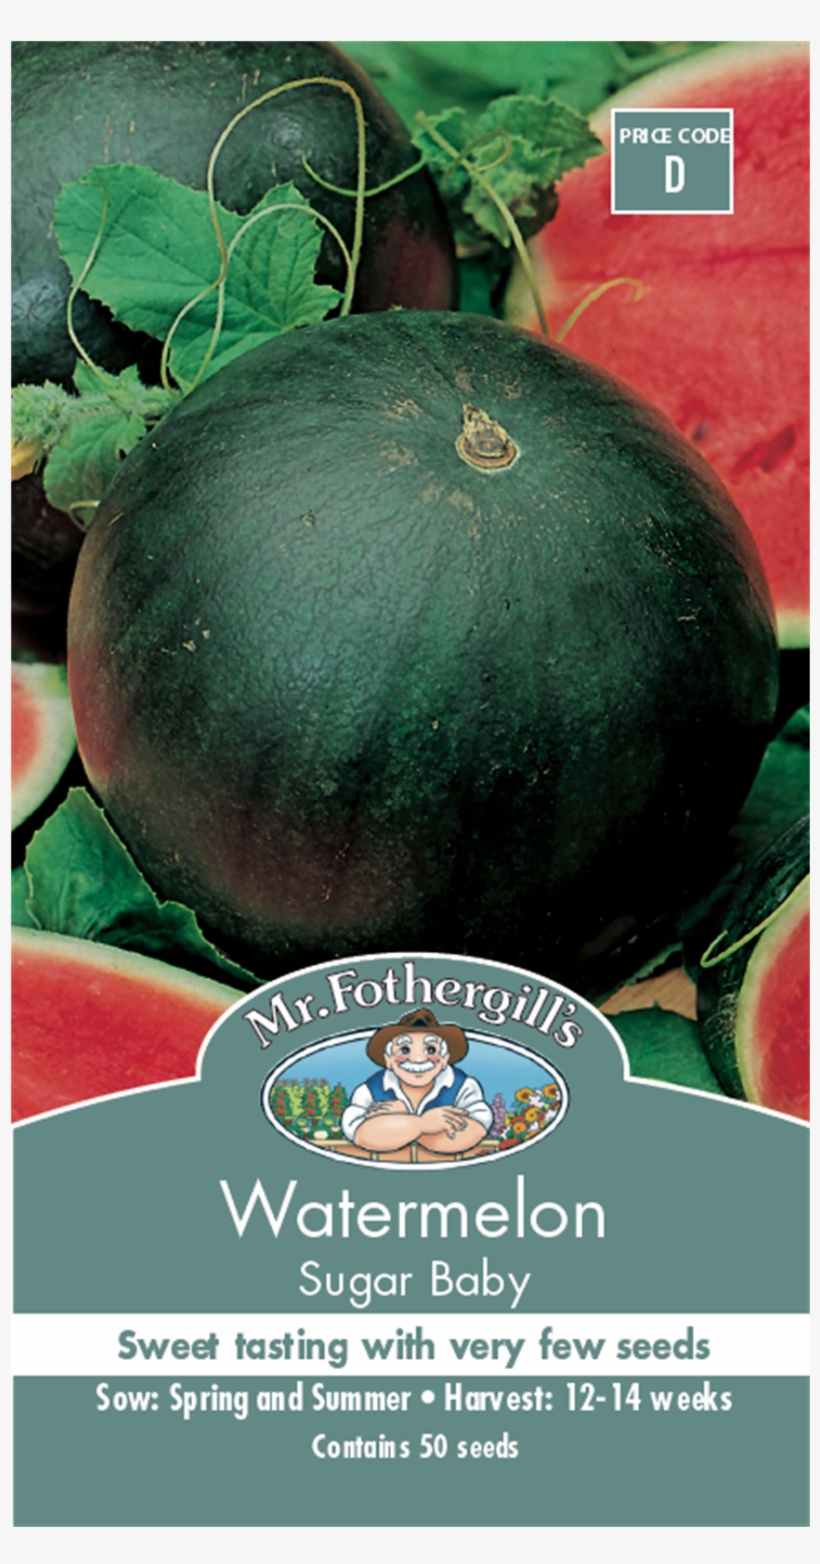 Mr Fothergill's Sugar Baby Water Melon Fruit Seed - Mcgregor's Baby Sugar Watermelon Seeds, transparent png #4026765